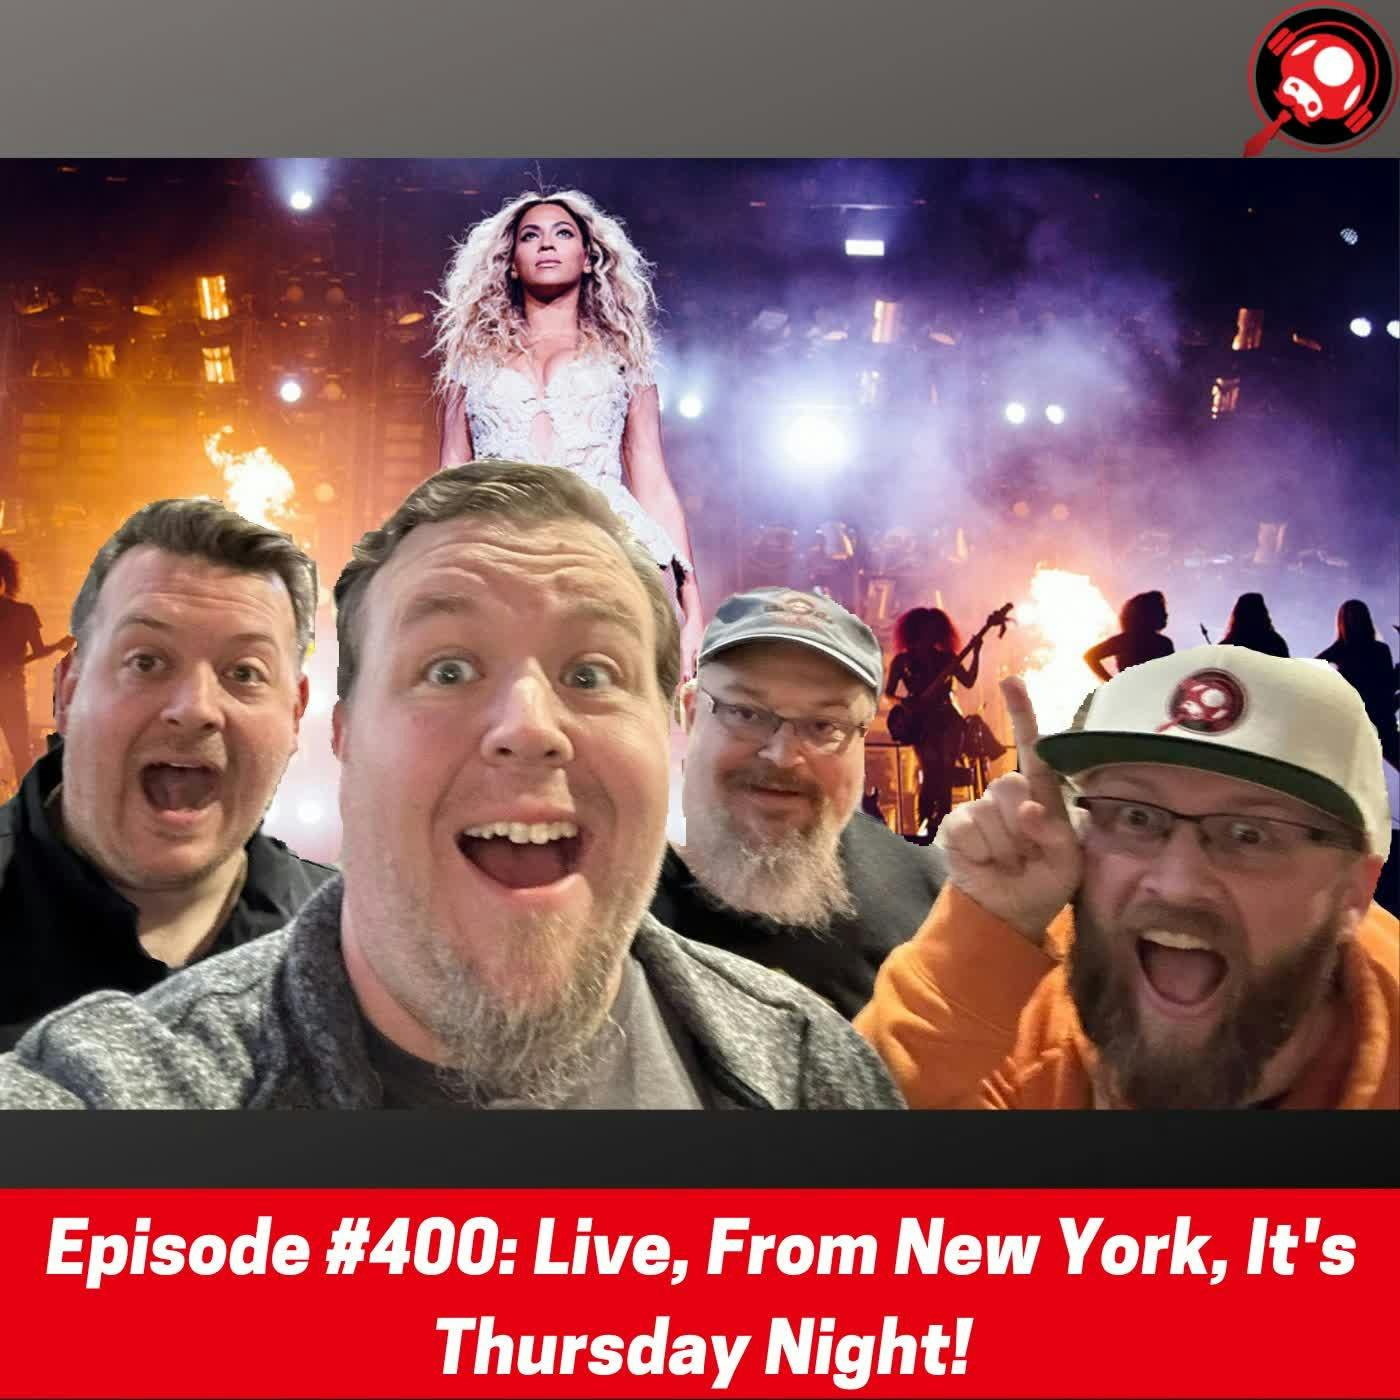 #400: Live, From New York, It’s Thursday Night!